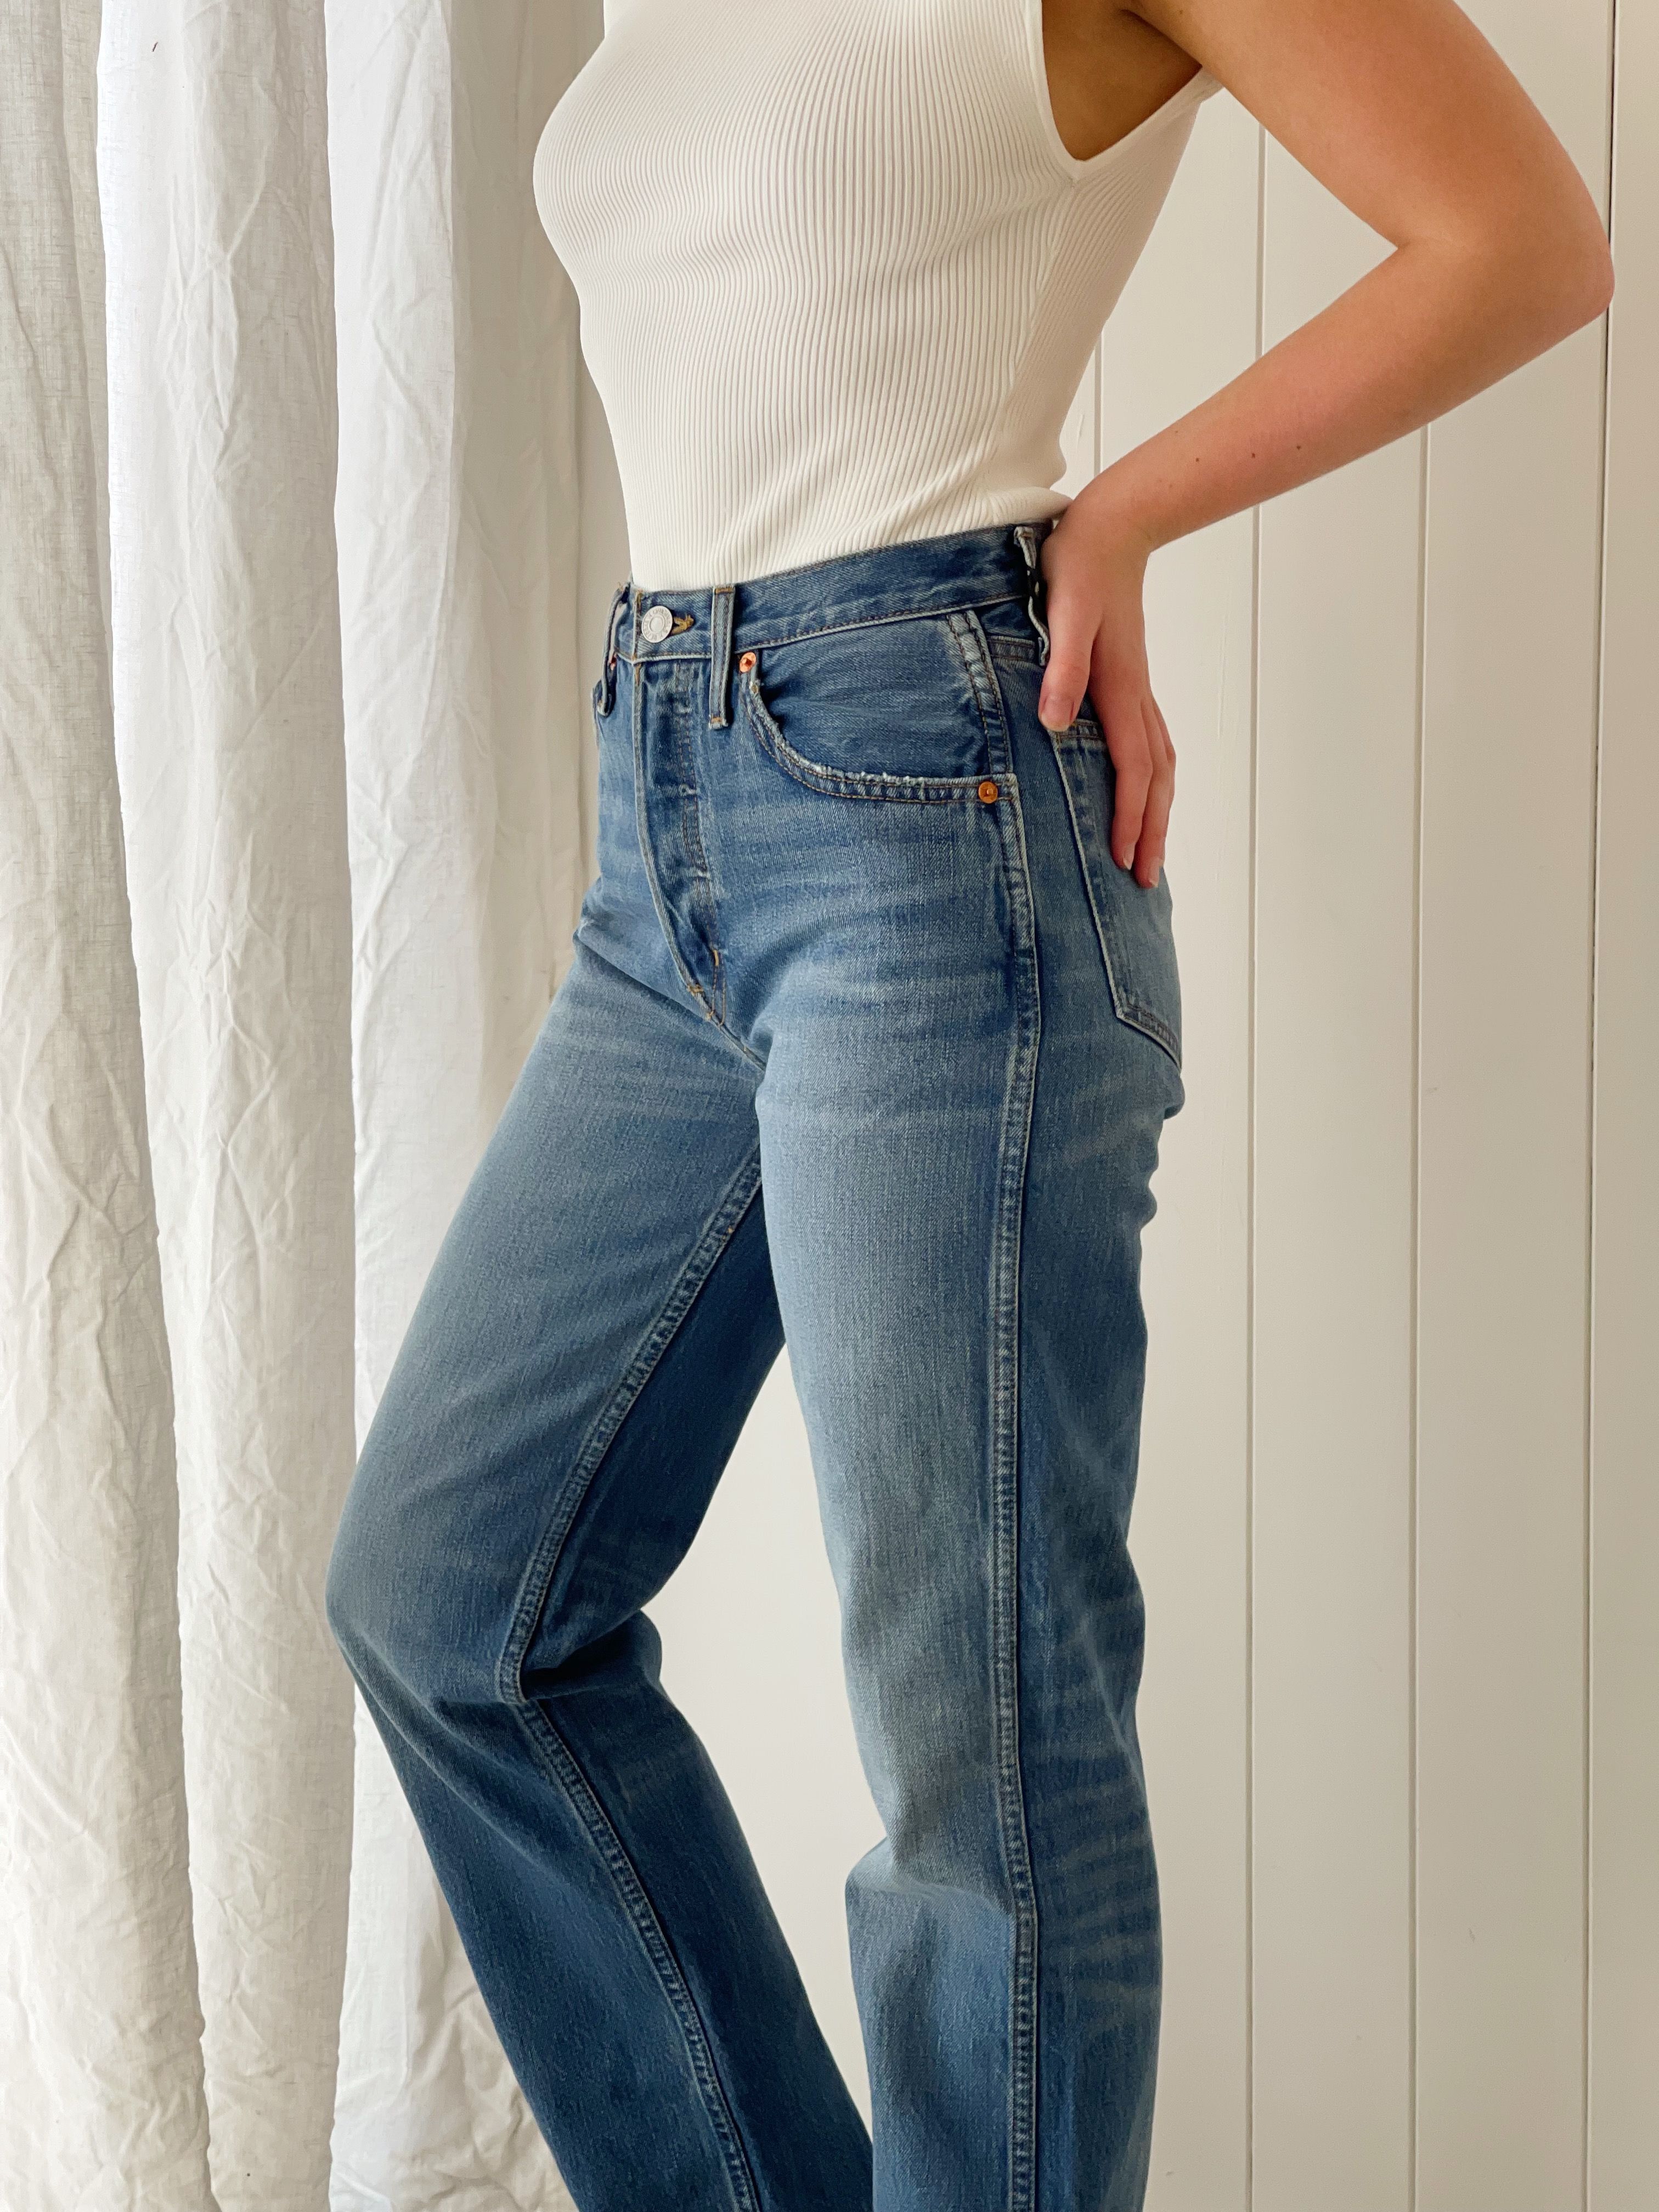 Finding Your Perfect Denim